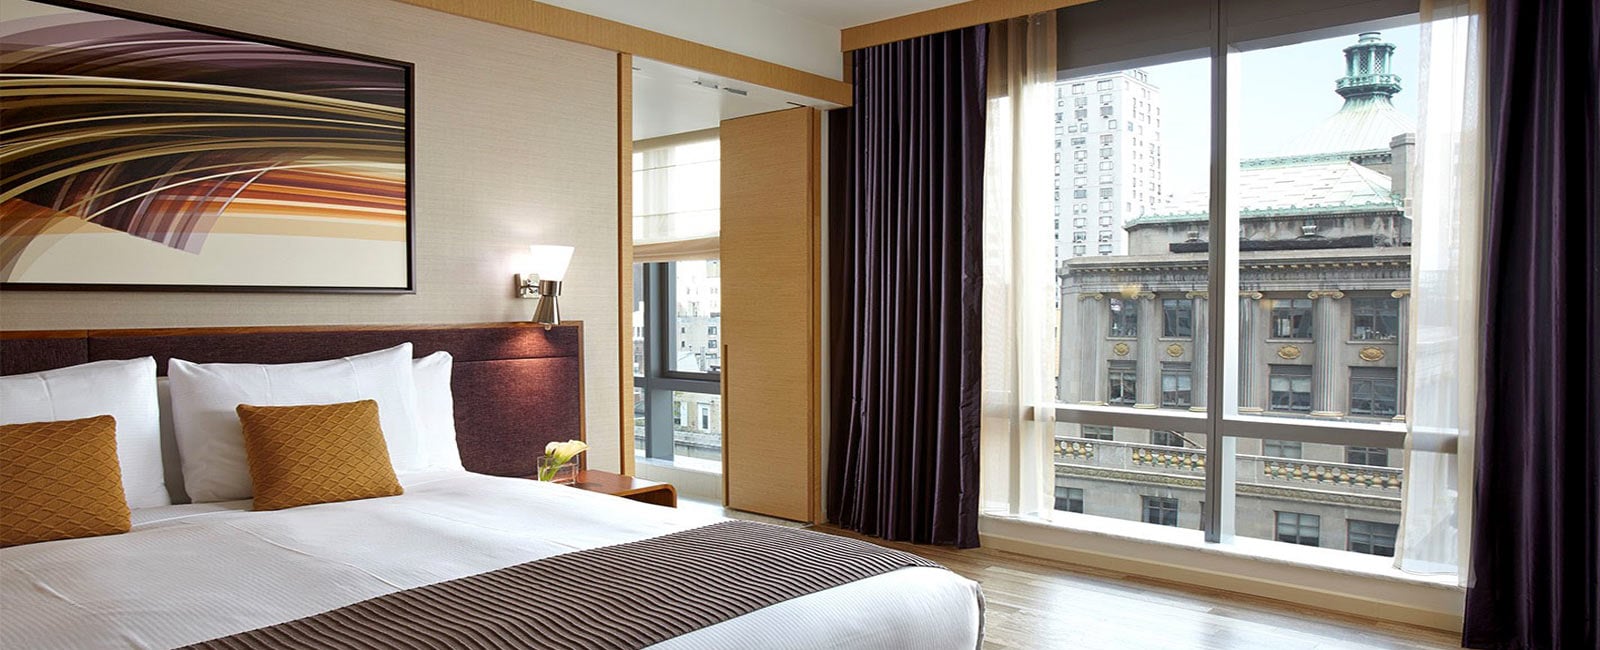 Bedroom at West 57th Street Resort by Hilton Club in New York